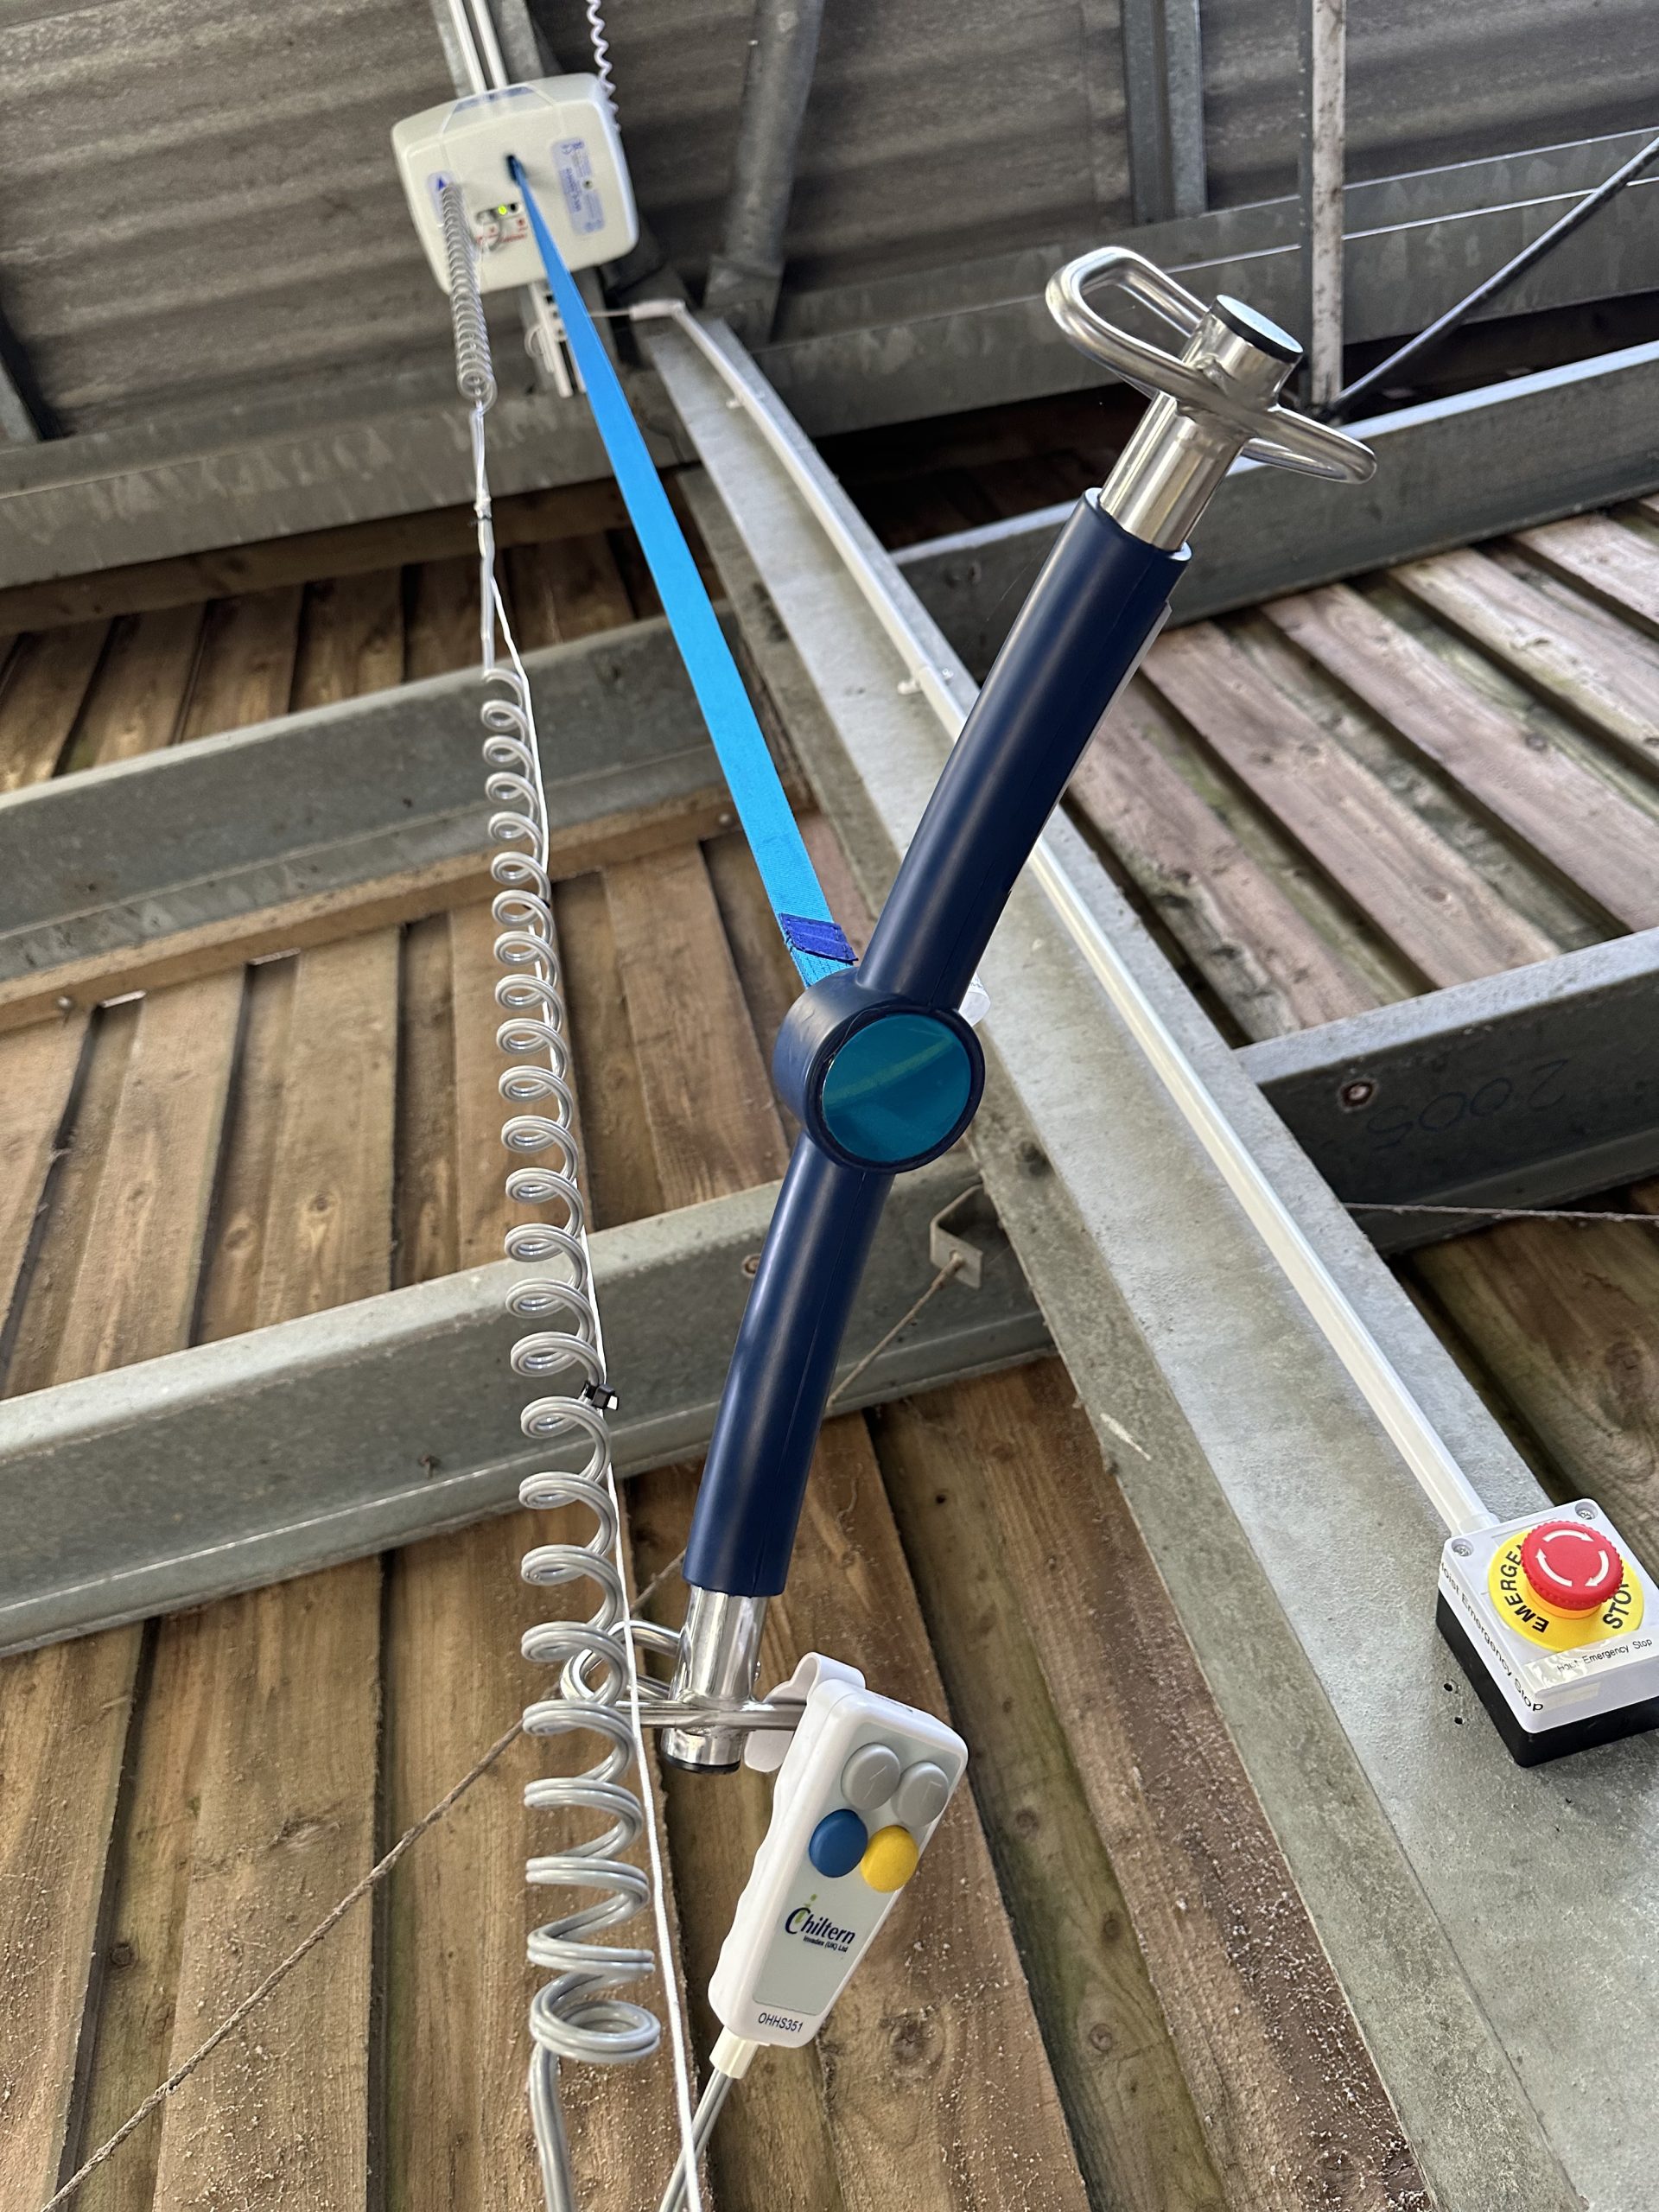 A view from below of a ceiling track hoist attached to a barn ceiling. It is a T-shaped blue bar with metal hooks at either end. There is a coiled wire hanging down alongside a blue belt attached to the bar. Attached to both is a remote control with coloured buttons.